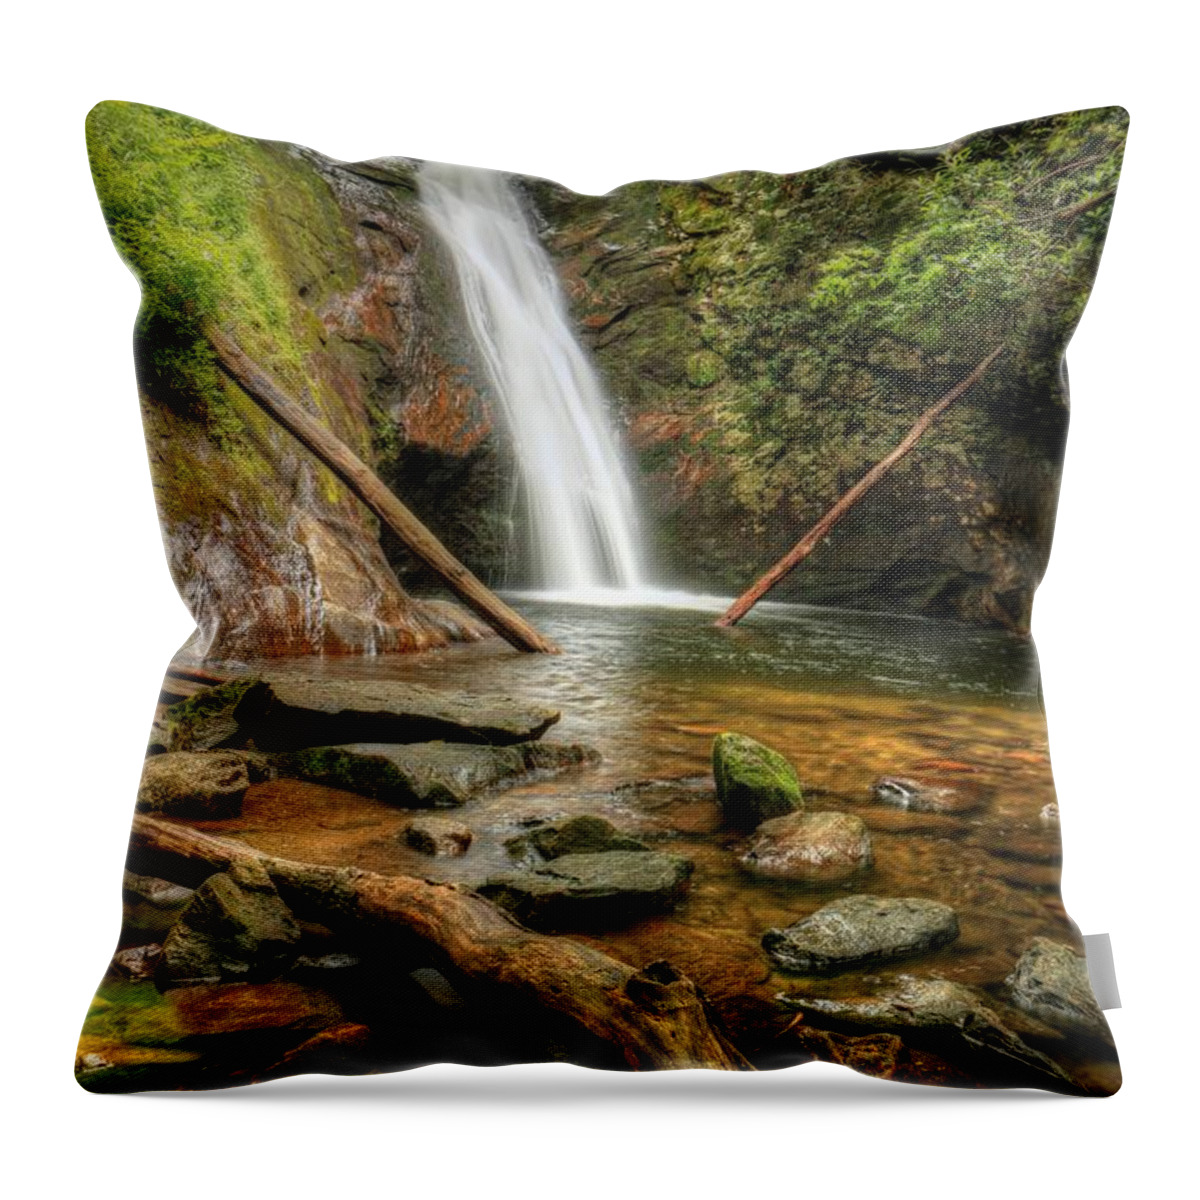 Courthouse Falls Throw Pillow featuring the photograph Courthouse Falls by Carol Montoya